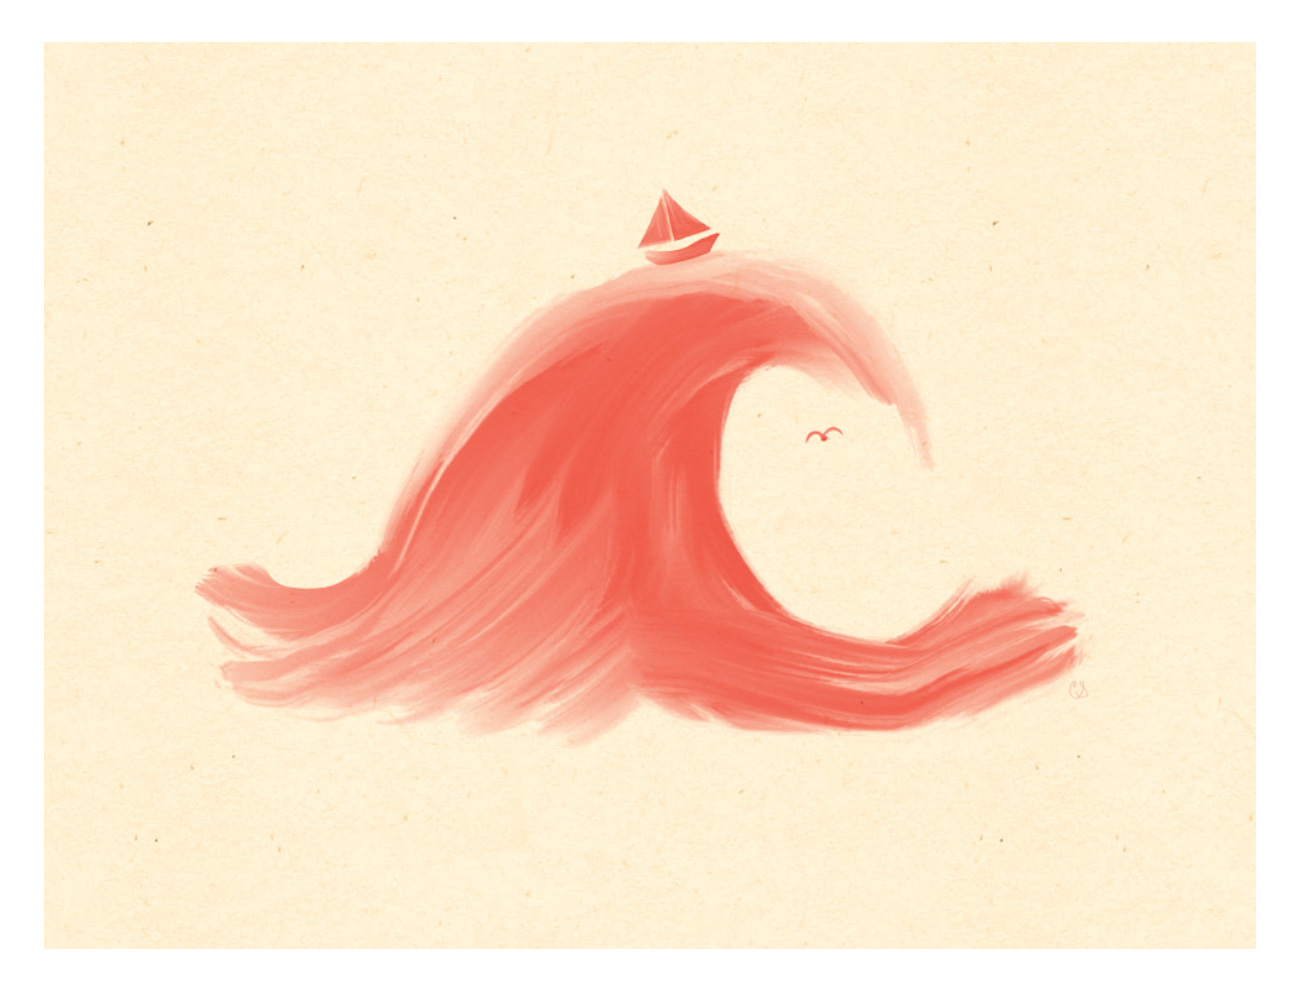 An illustration of a tiny sailboat riding a giant wave